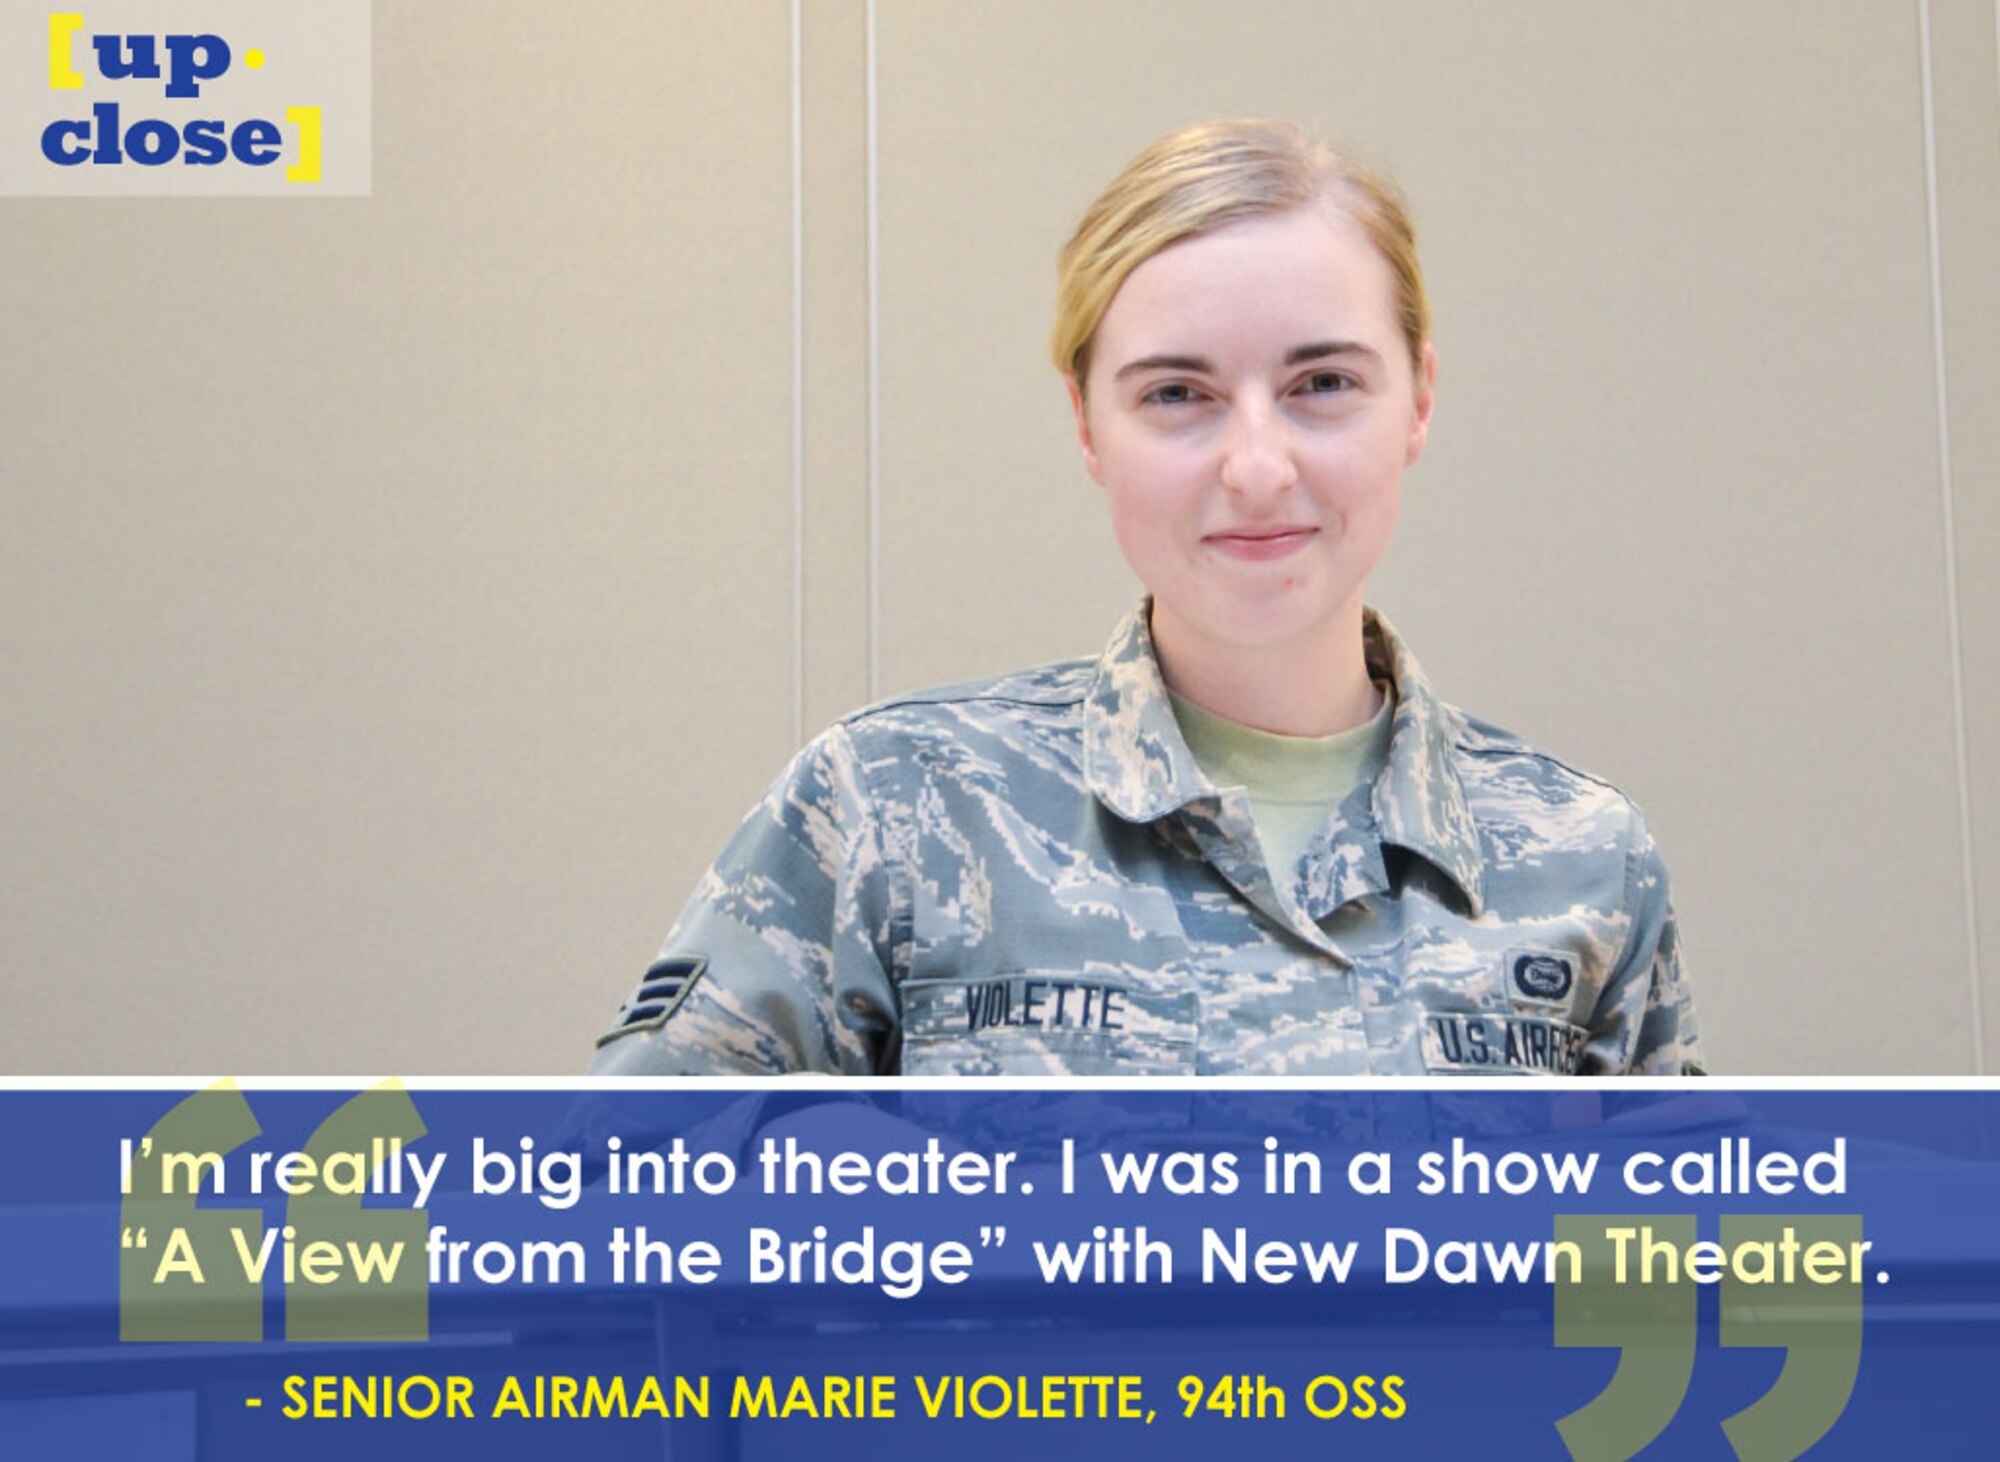 This week’s Up Close features Senior Airman Marie Violette, a 94th Operations Support Squadron intelligence analyst. Up Close is a series spotlighting individuals around Dobbins Air Reserve Base. (U.S. Air Force graphic/Staff Sgt. Andrew Park; U.S. Air Force photo/Senior Airman Lauren Douglas)